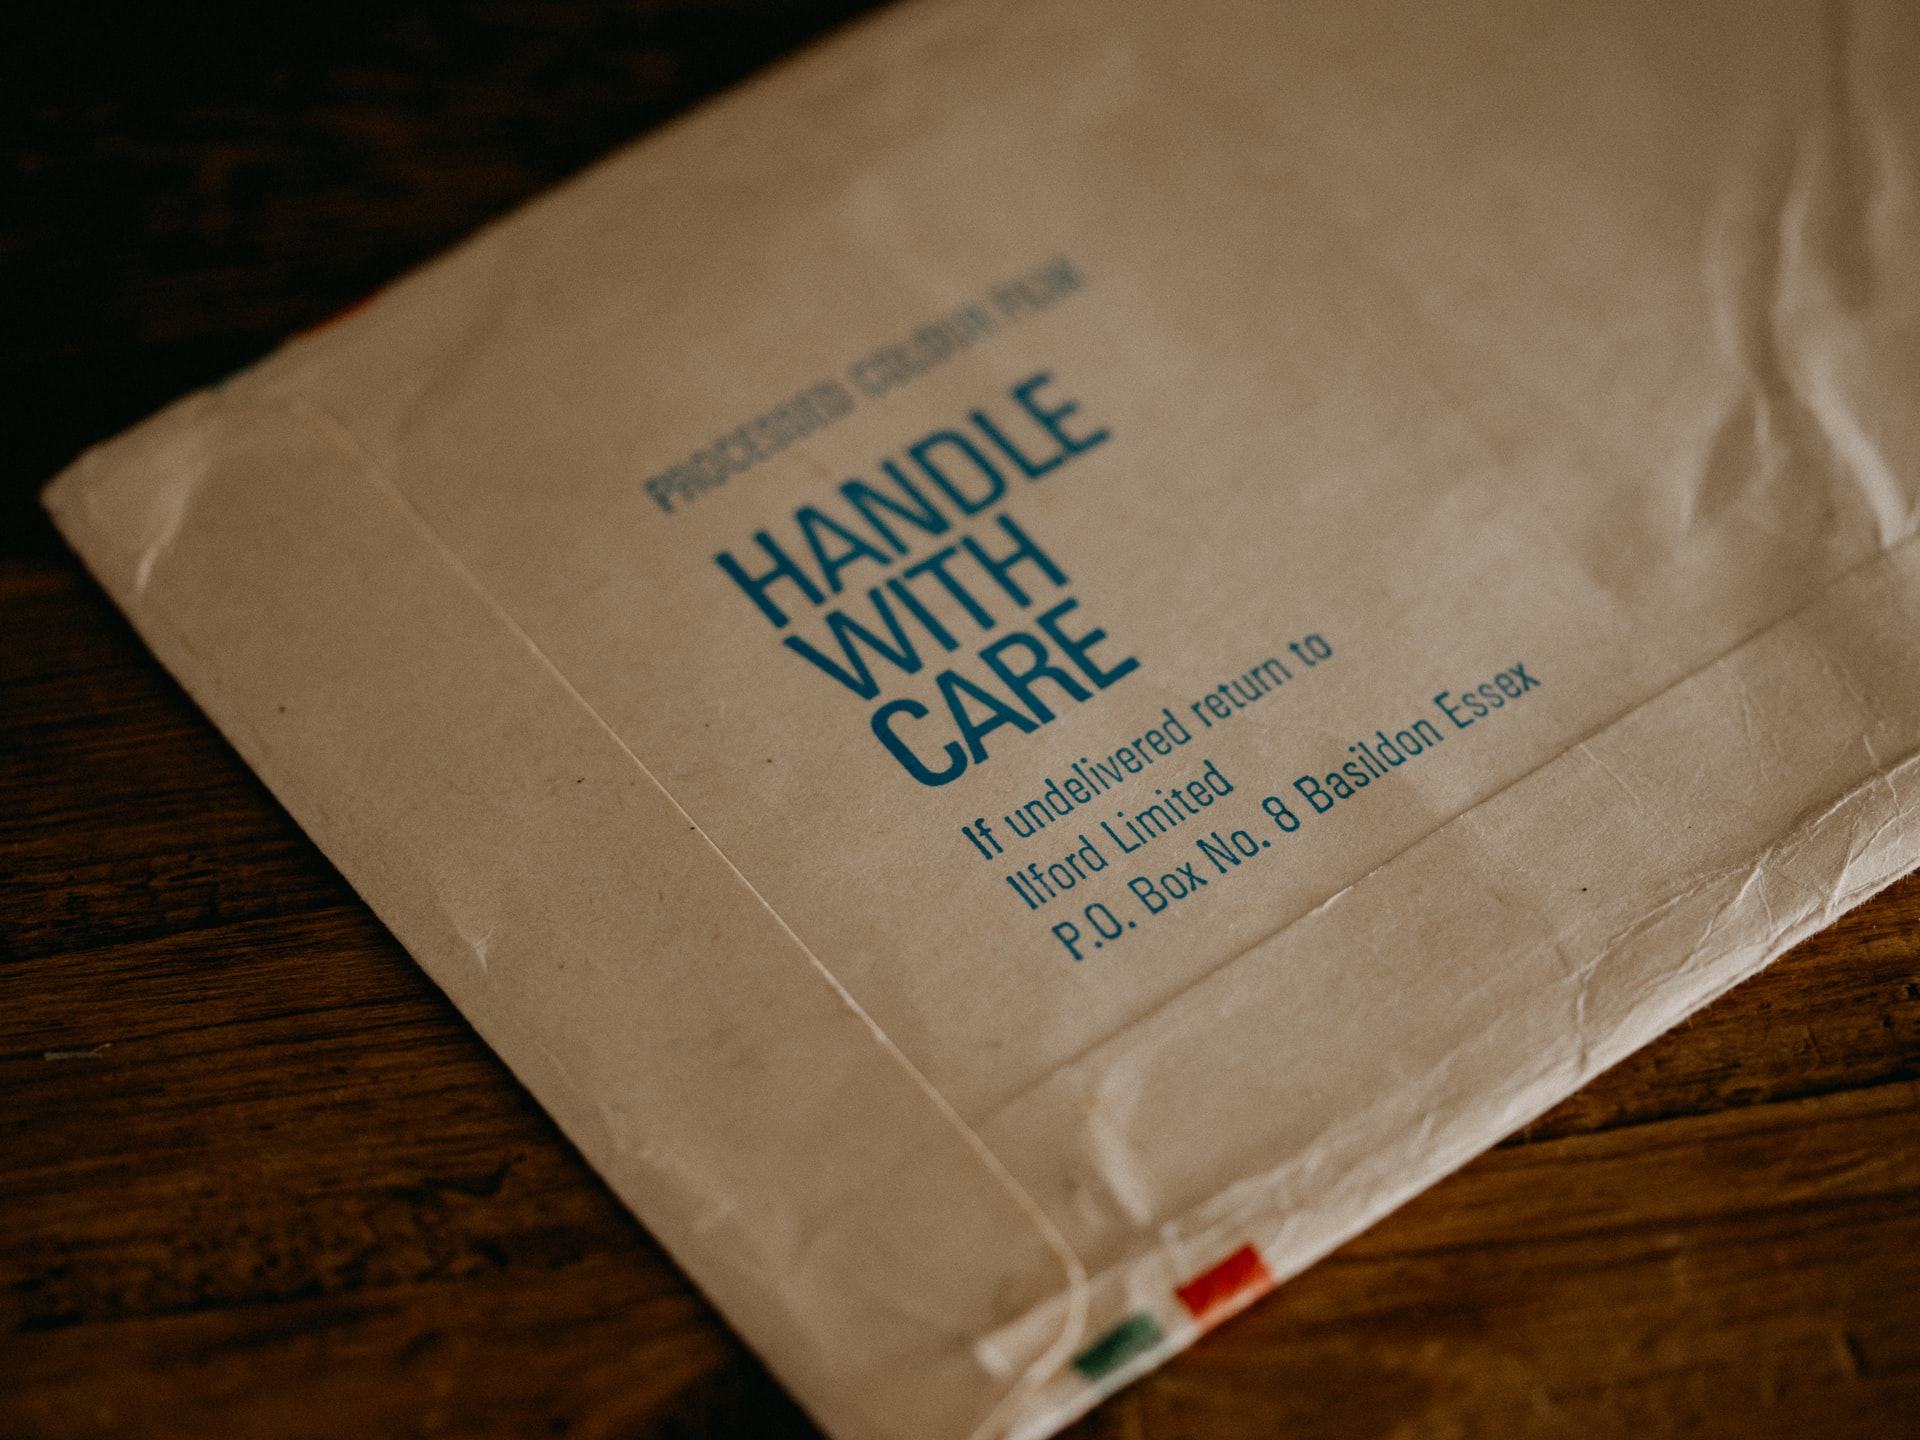 Handle with care package